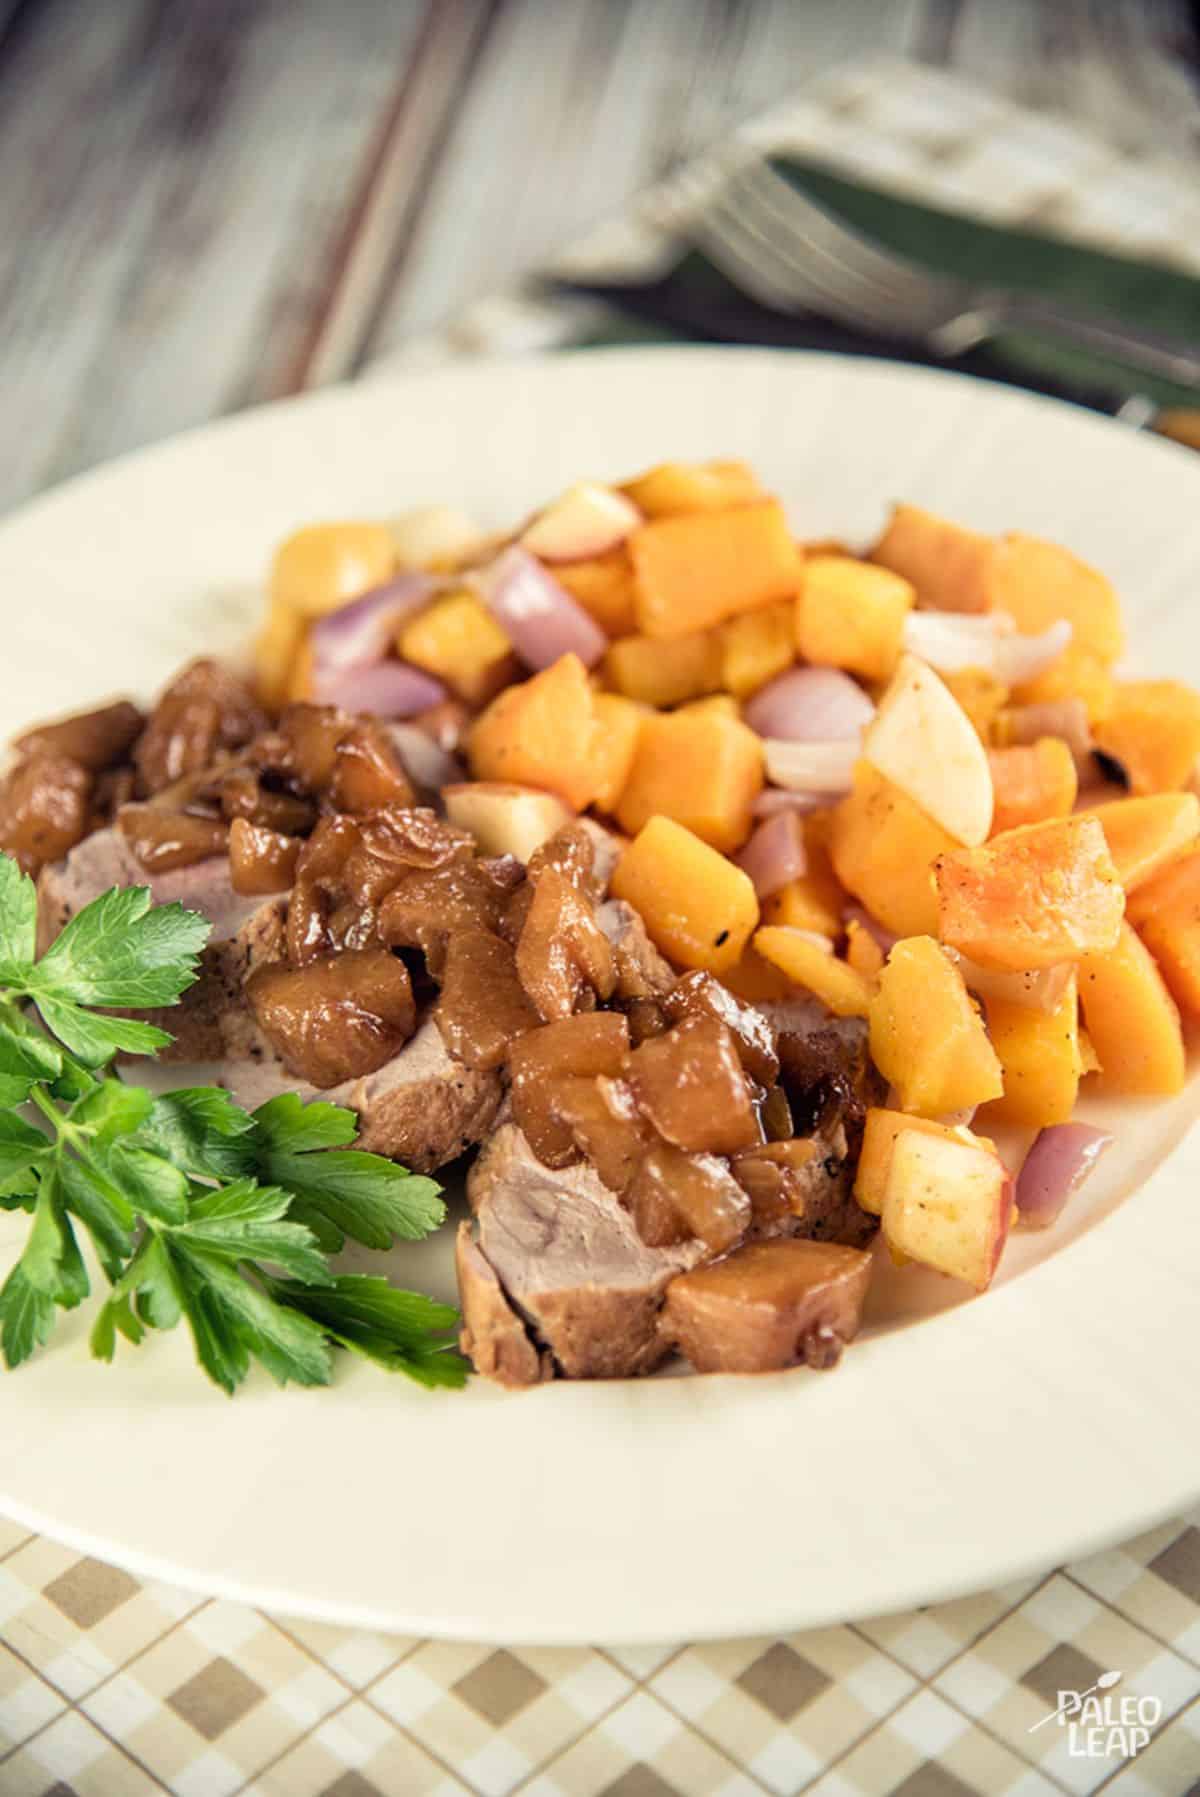 Pork Tenderloin With Pears And Roasted Butternut Squash